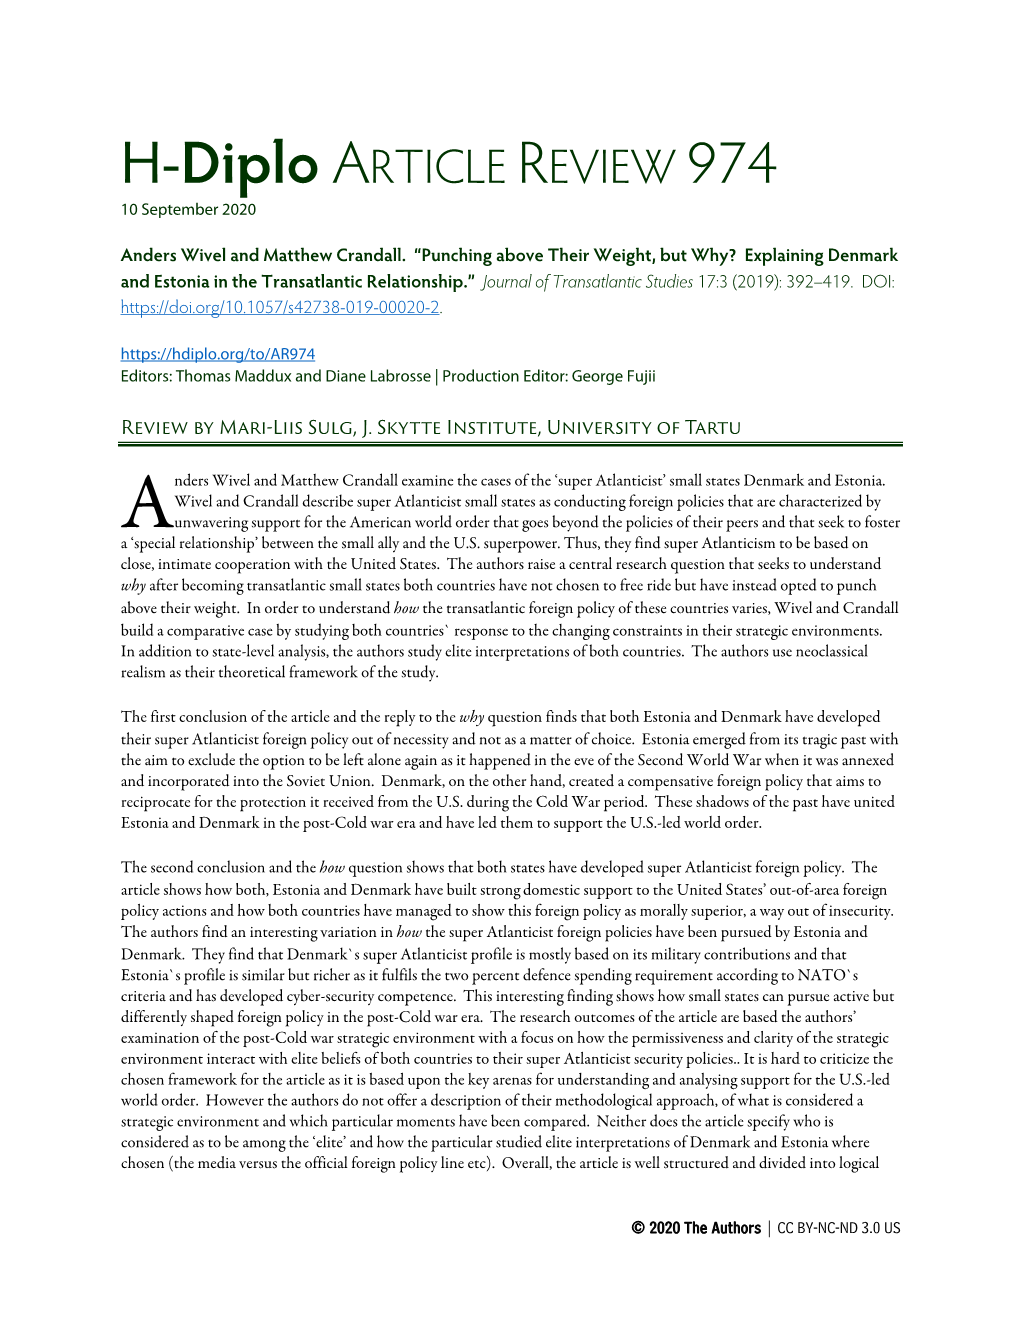 H-Diplo ARTICLE REVIEW 974 10 September 2020